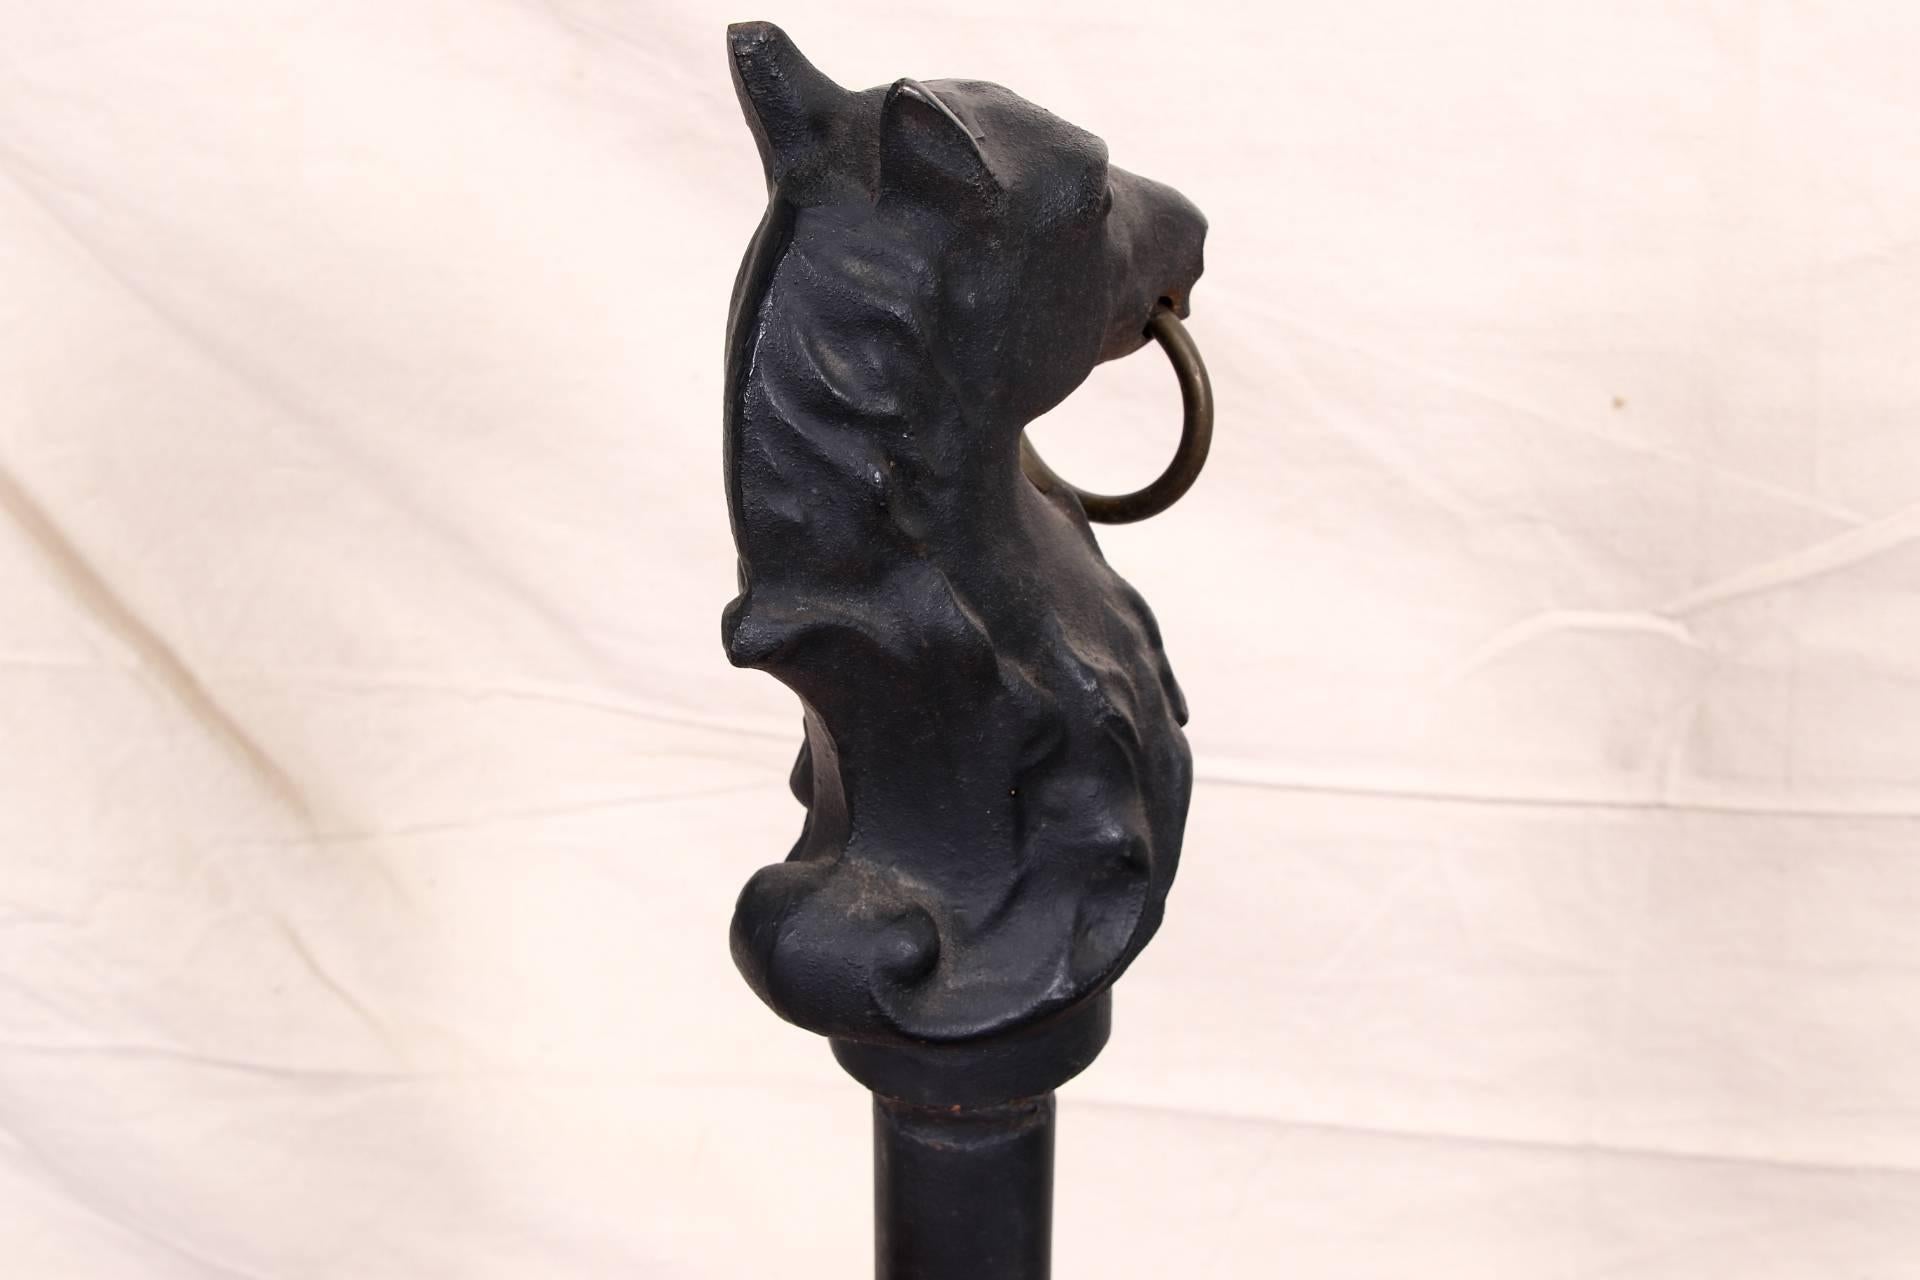 Cast iron hitching post with horse head, circa 1960s, black painted finish with a finely modeled horse head with scrolled leafy base and brass ring, mounted on a shaped Stand with a circular tiered base. 

Condition: Expected wear and signs of use